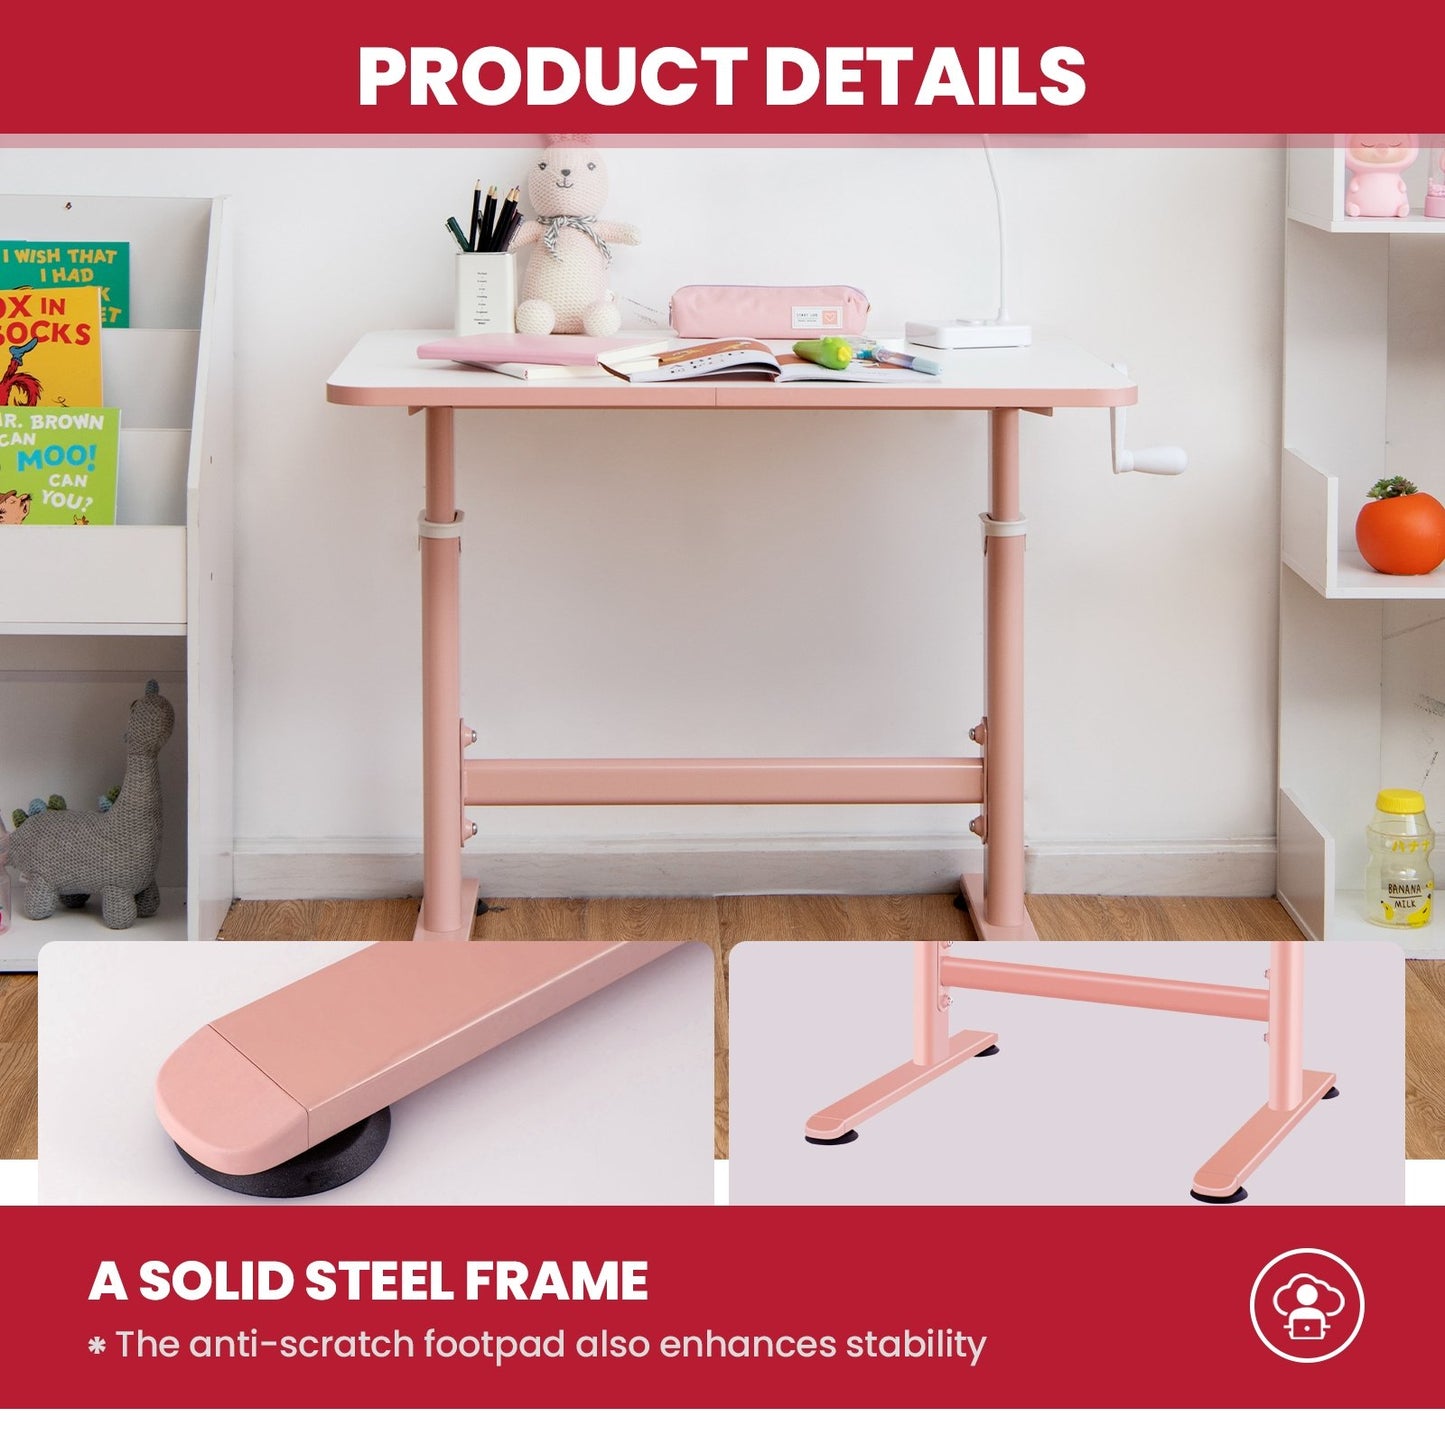 32 x 24 Inch Height Adjustable Desk with Hand Crank Adjusting for Kids, Pink at Gallery Canada